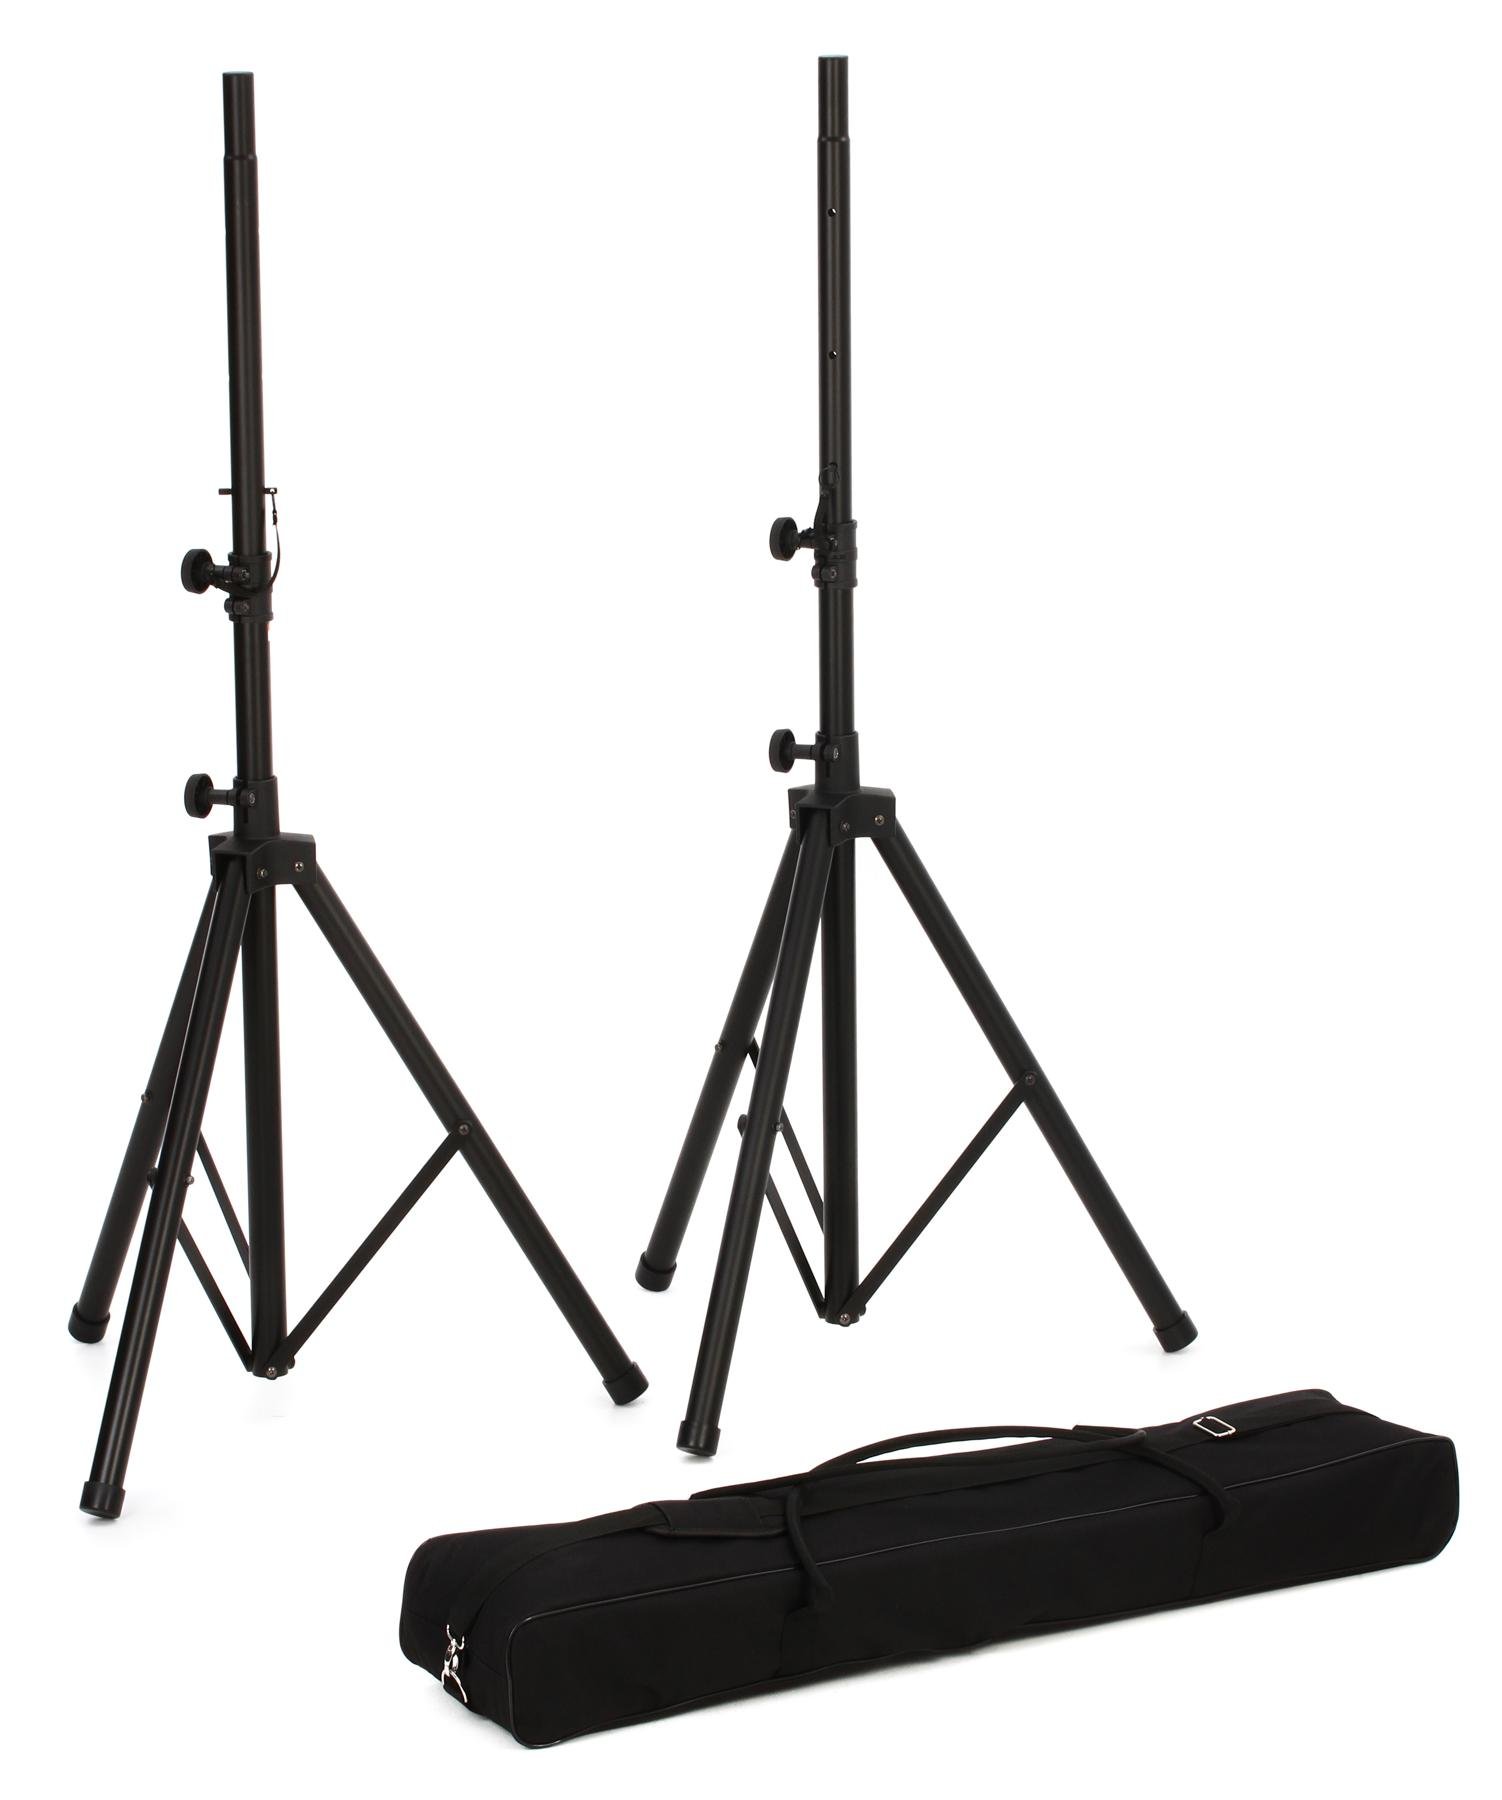 Yamaha SS238C Aluminum Speaker Stands with Bag | Sweetwater